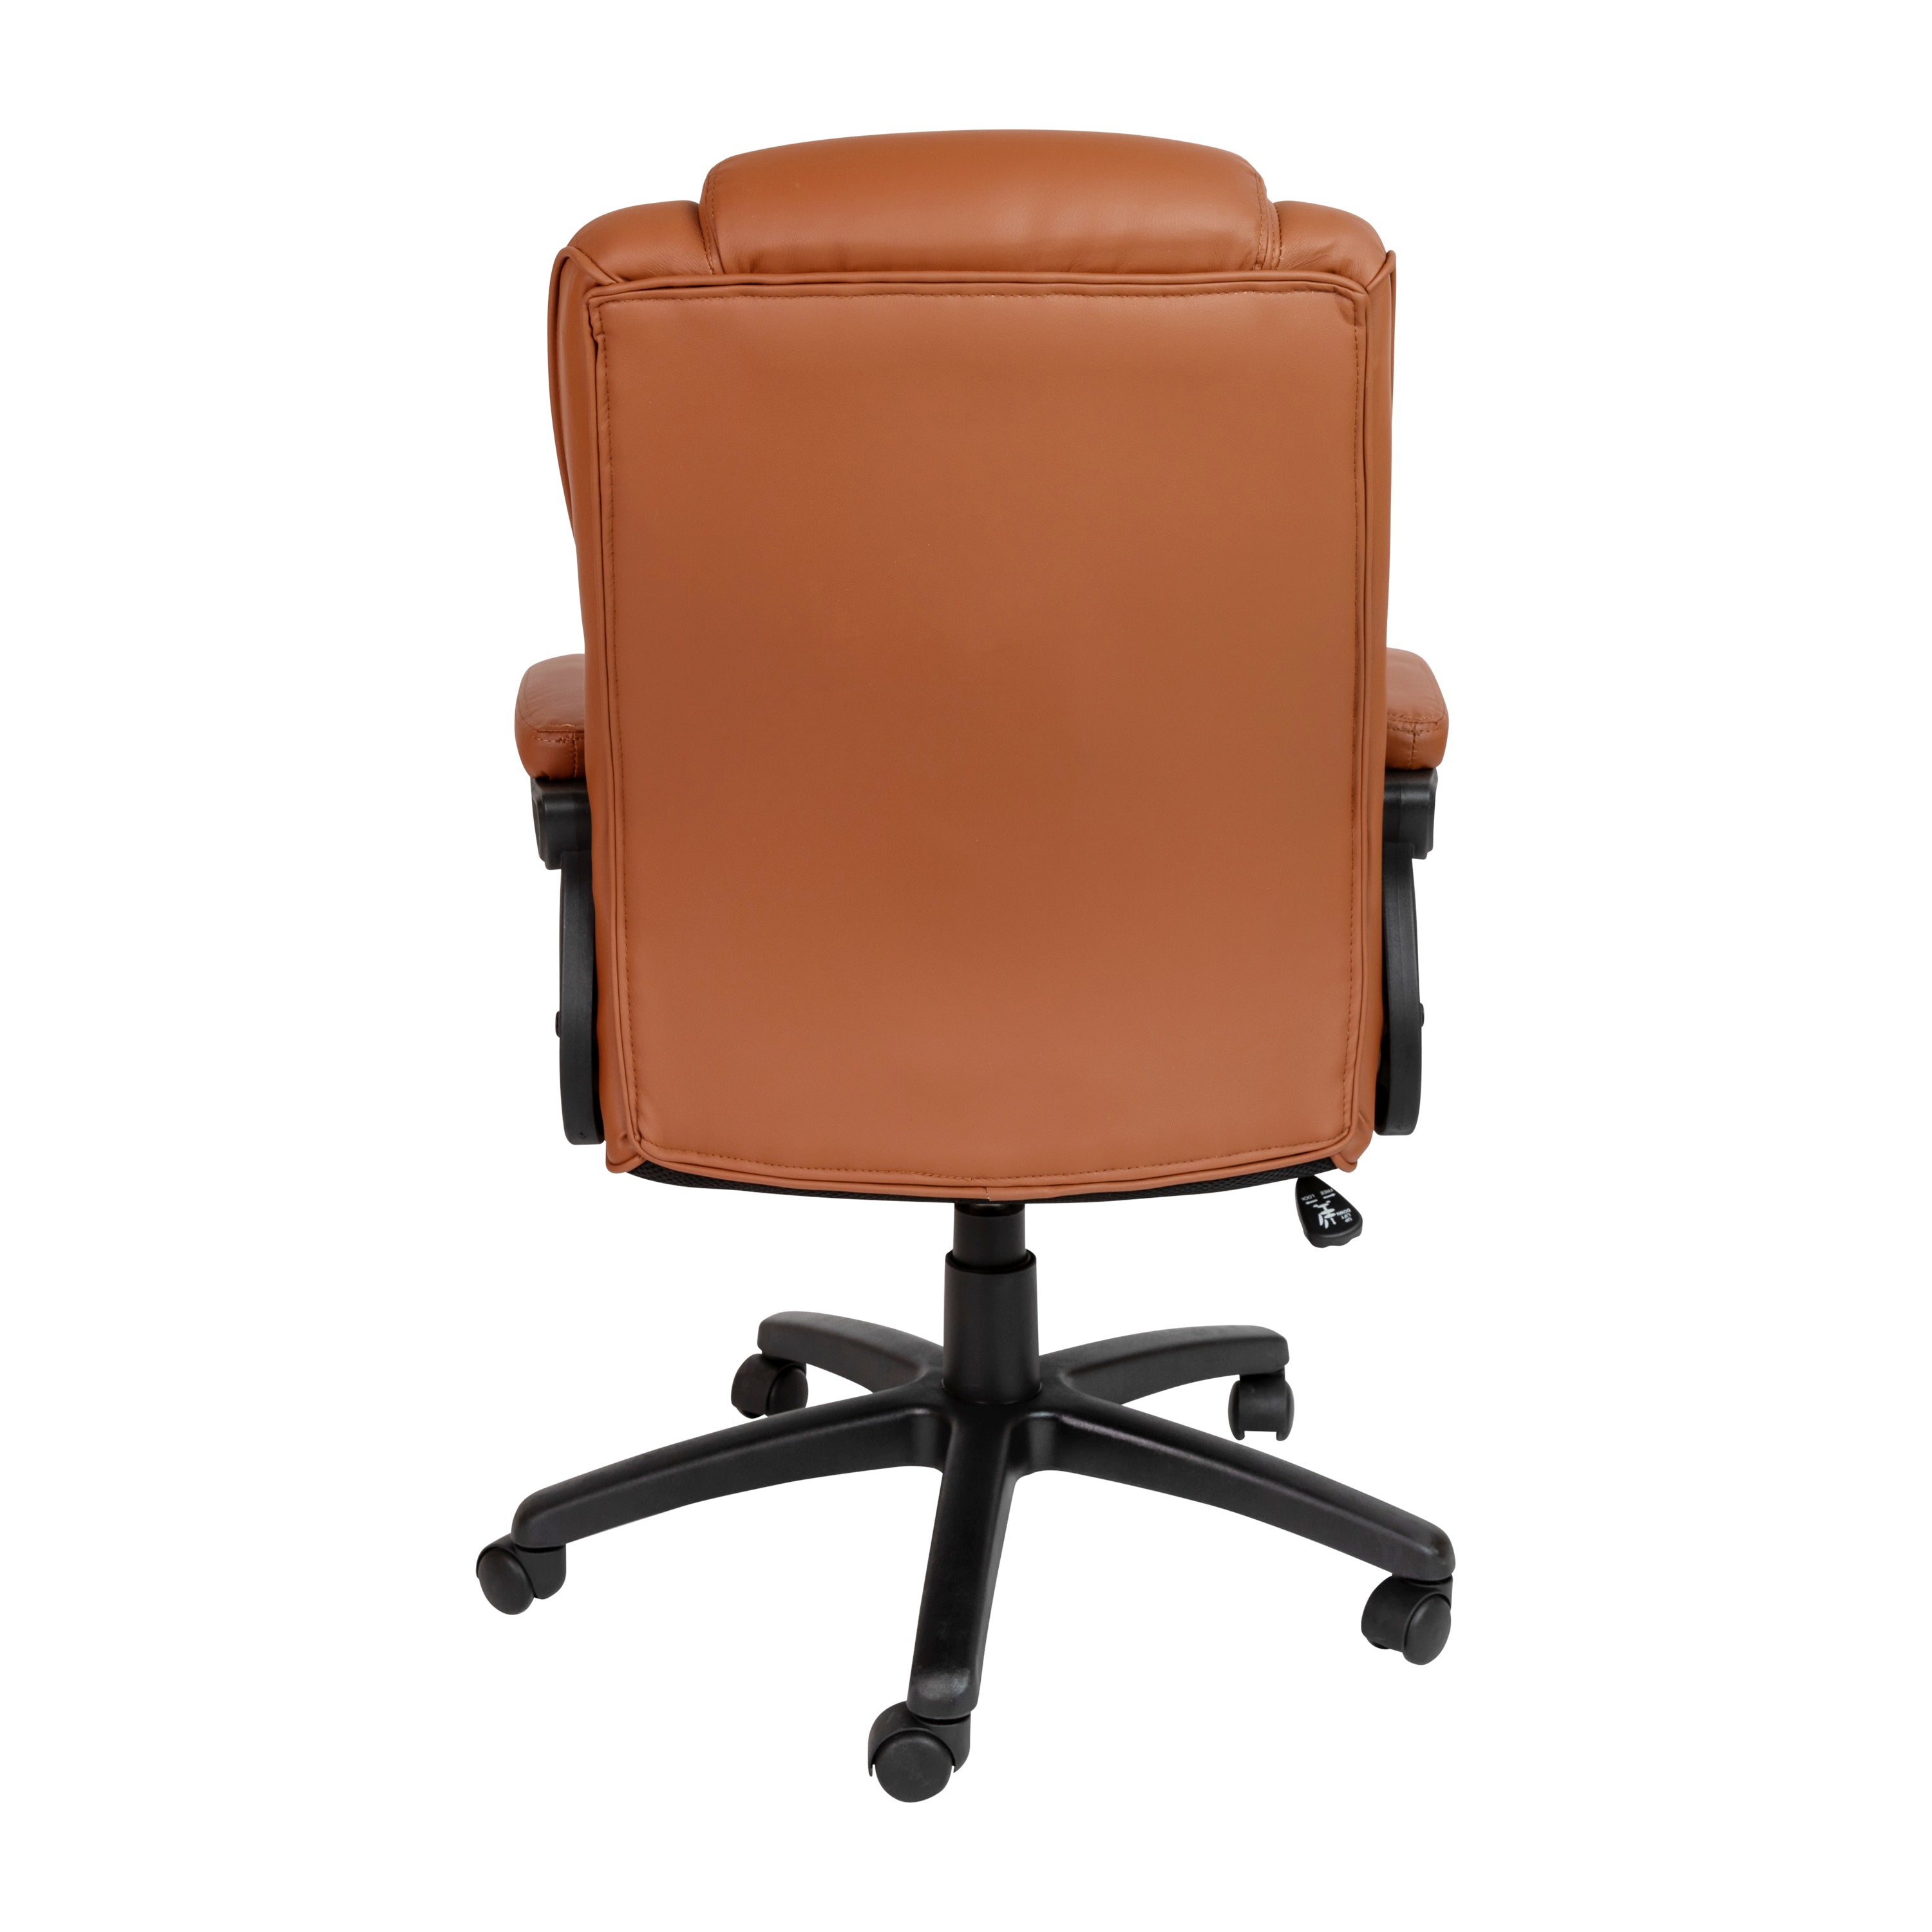 Flash Fundamentals Big & Tall 400 lb. Rated LeatherSoft Swivel Office Chair with Padded Arms-Big & Tall Office Chair-Flash Furniture-Wall2Wall Furnishings